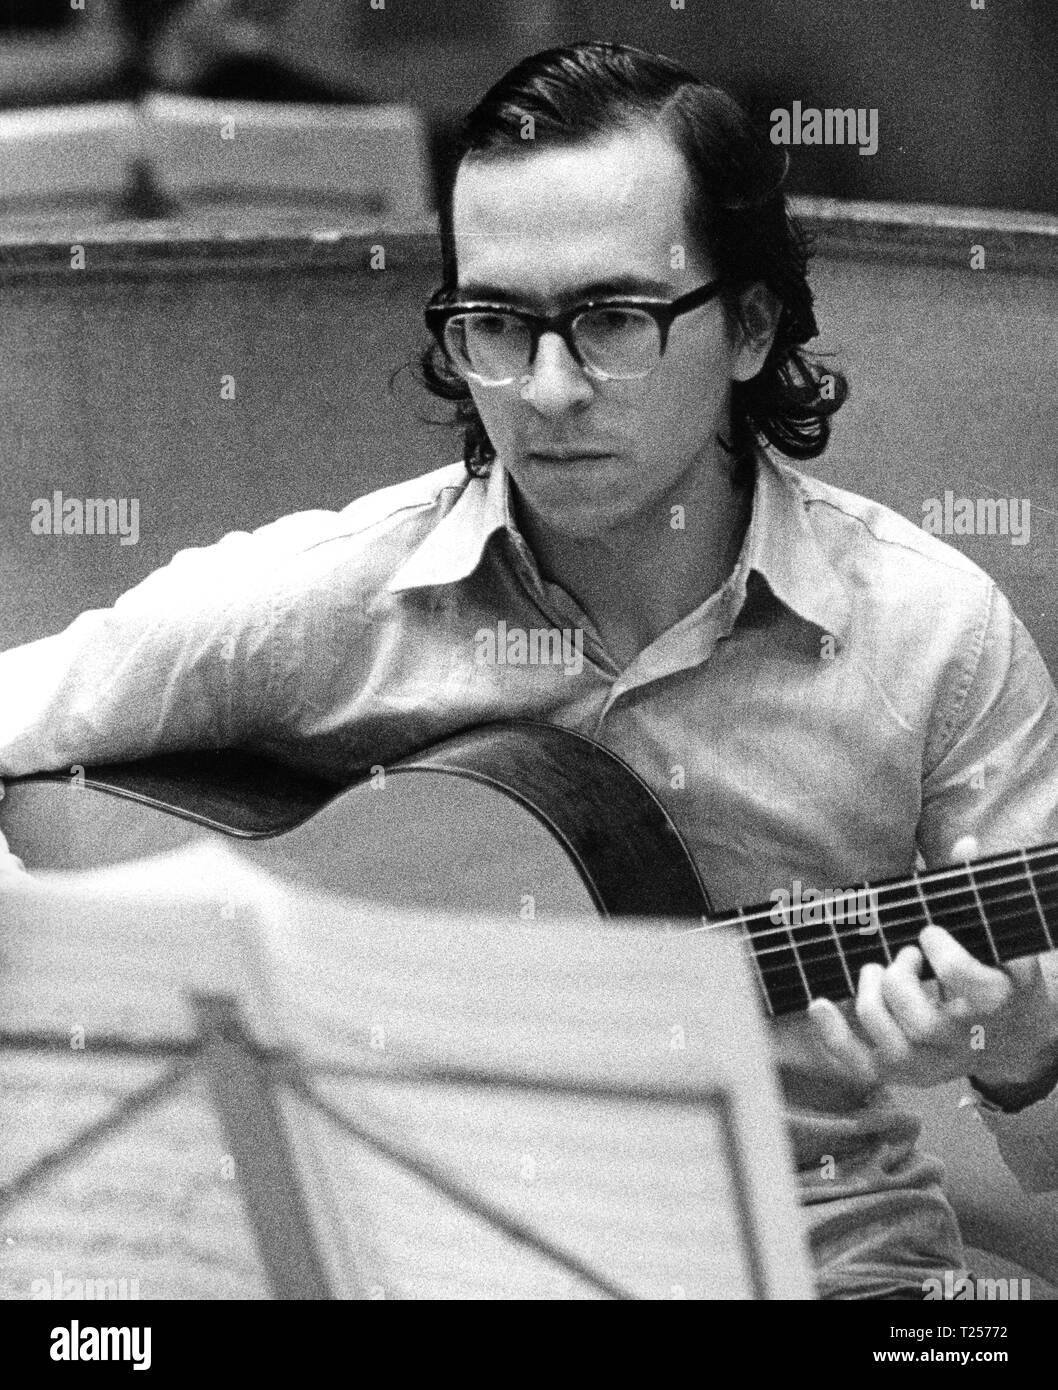 The Raging Moon (1971)  John Williams, Guitarist recording music for the film      Date: 1971 Stock Photo